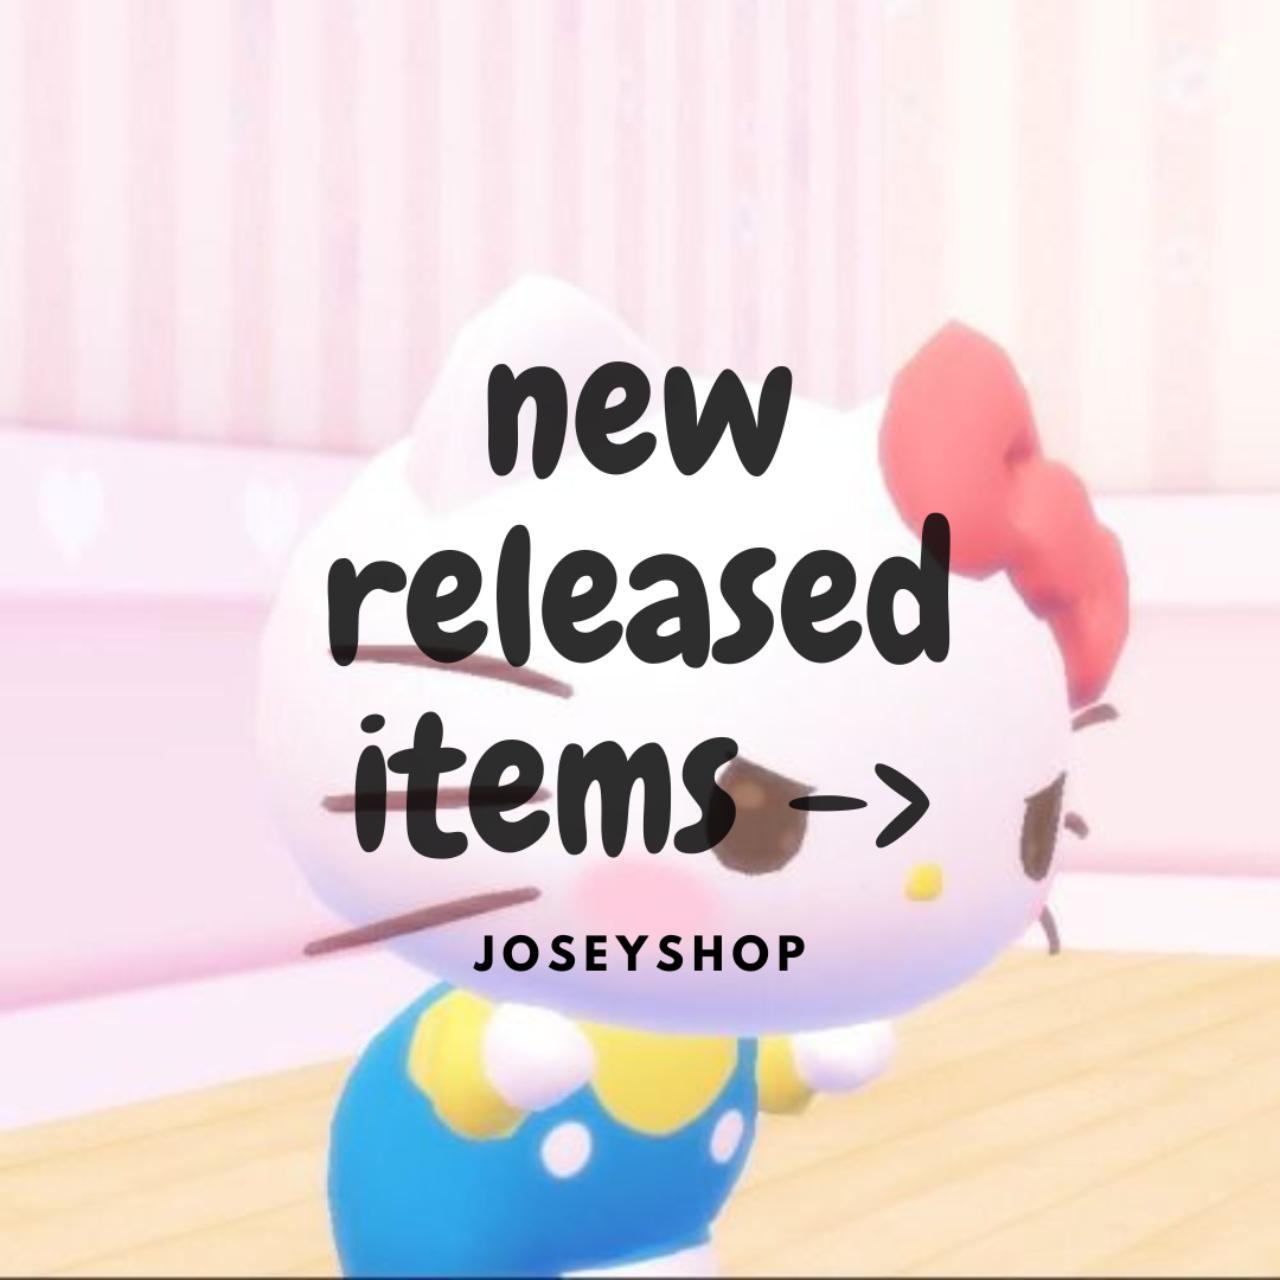 item listed by joseyshop